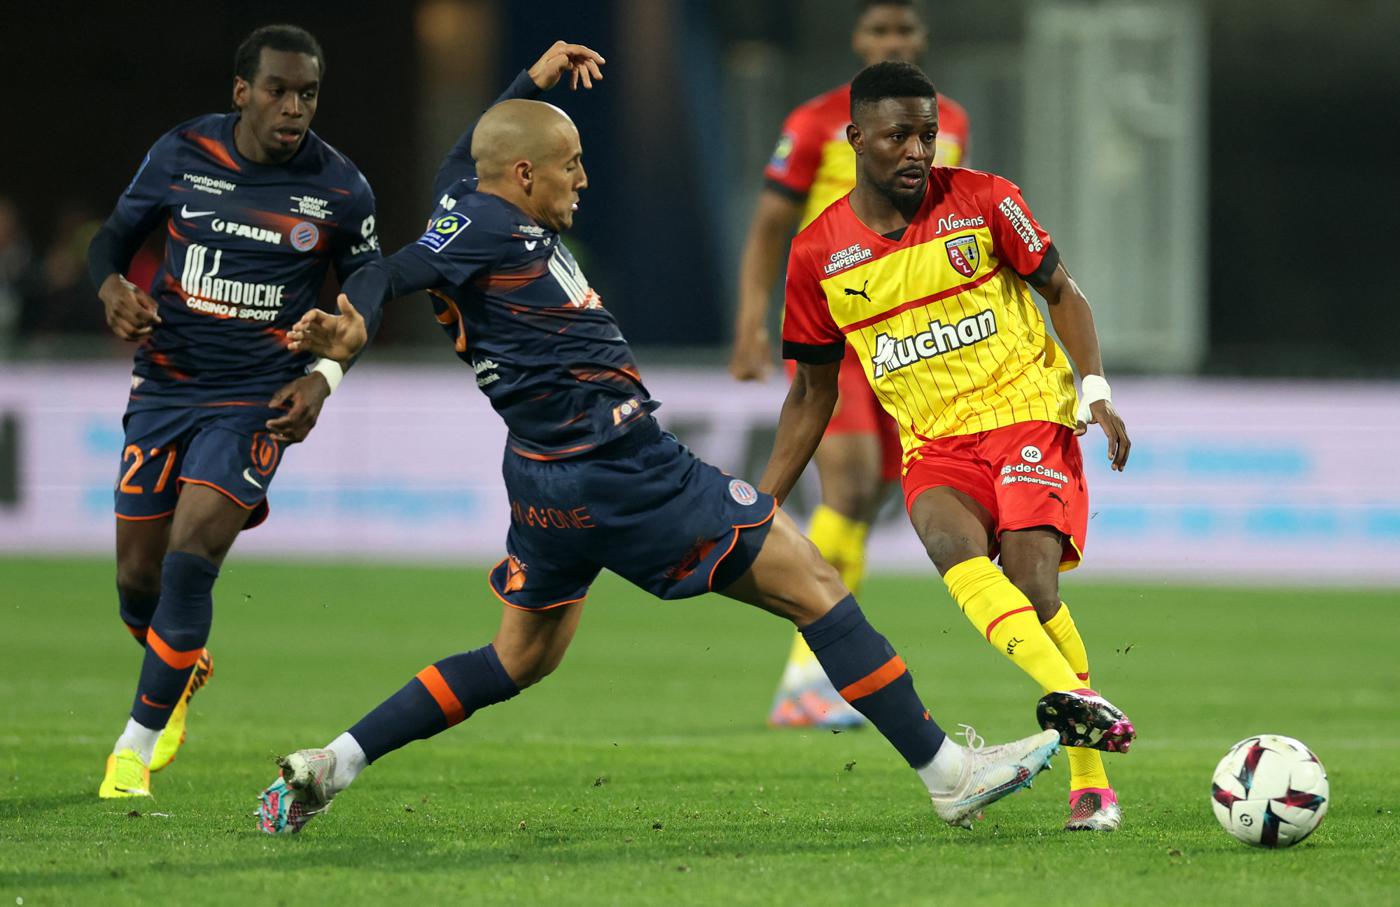 Montpellier vs Lans - 1:1. French Championship, 25th round. Match review, statistics